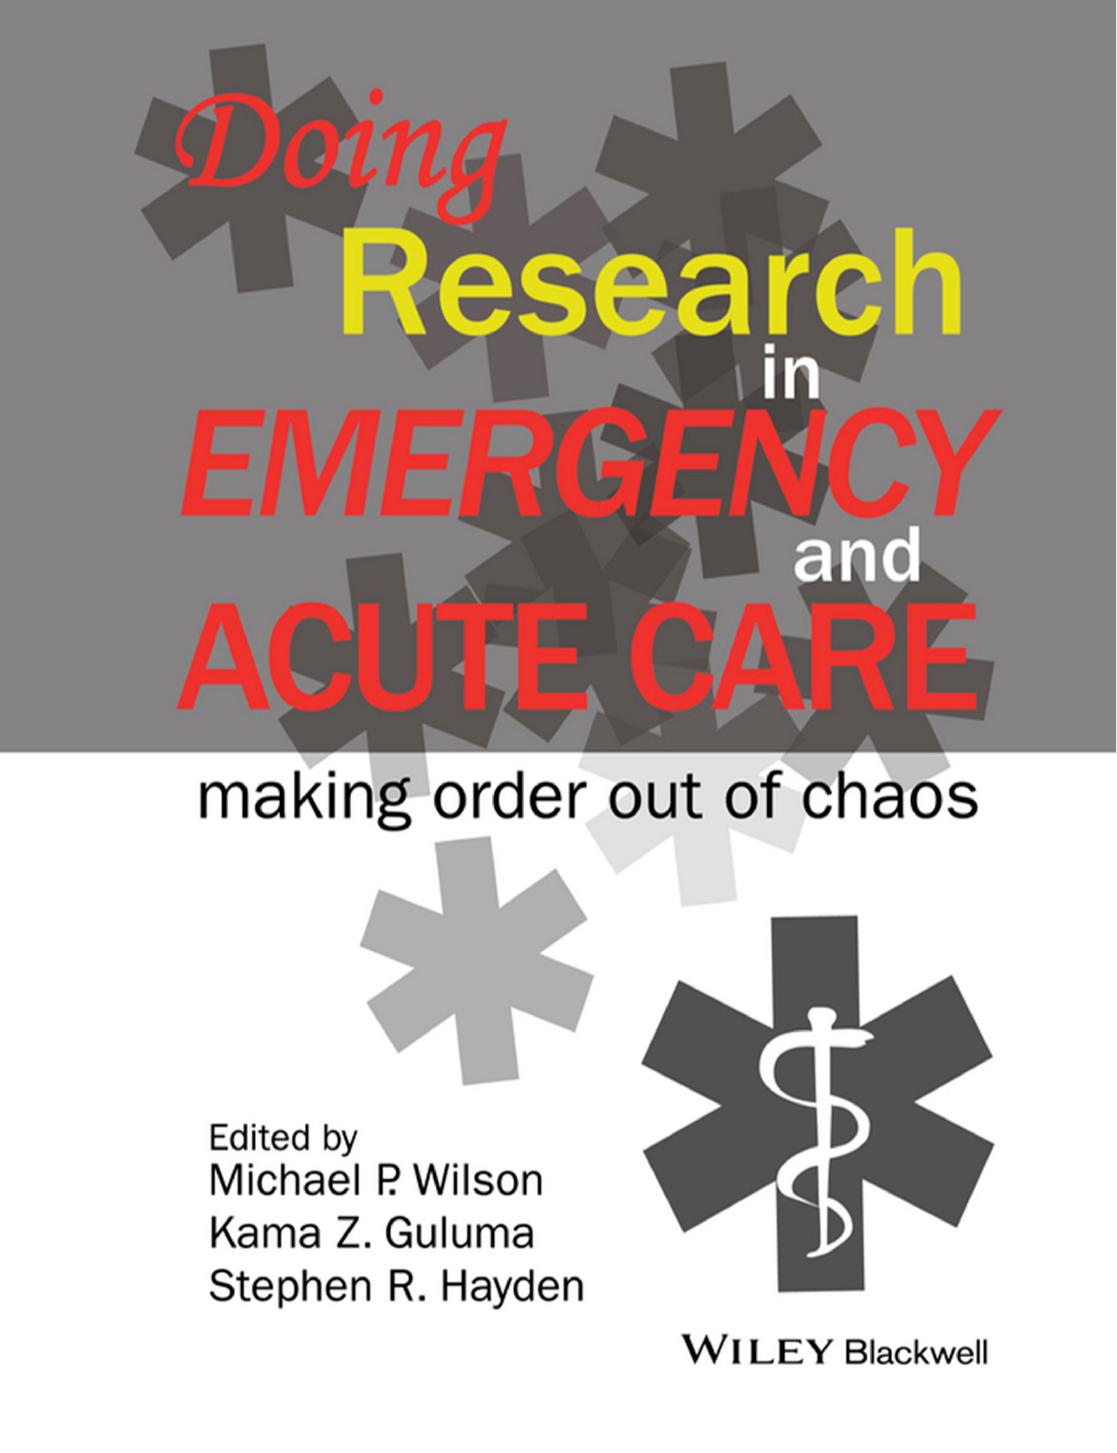 Doing Research in Emergency and Acute Care Making Order Out of Chaos.jpg